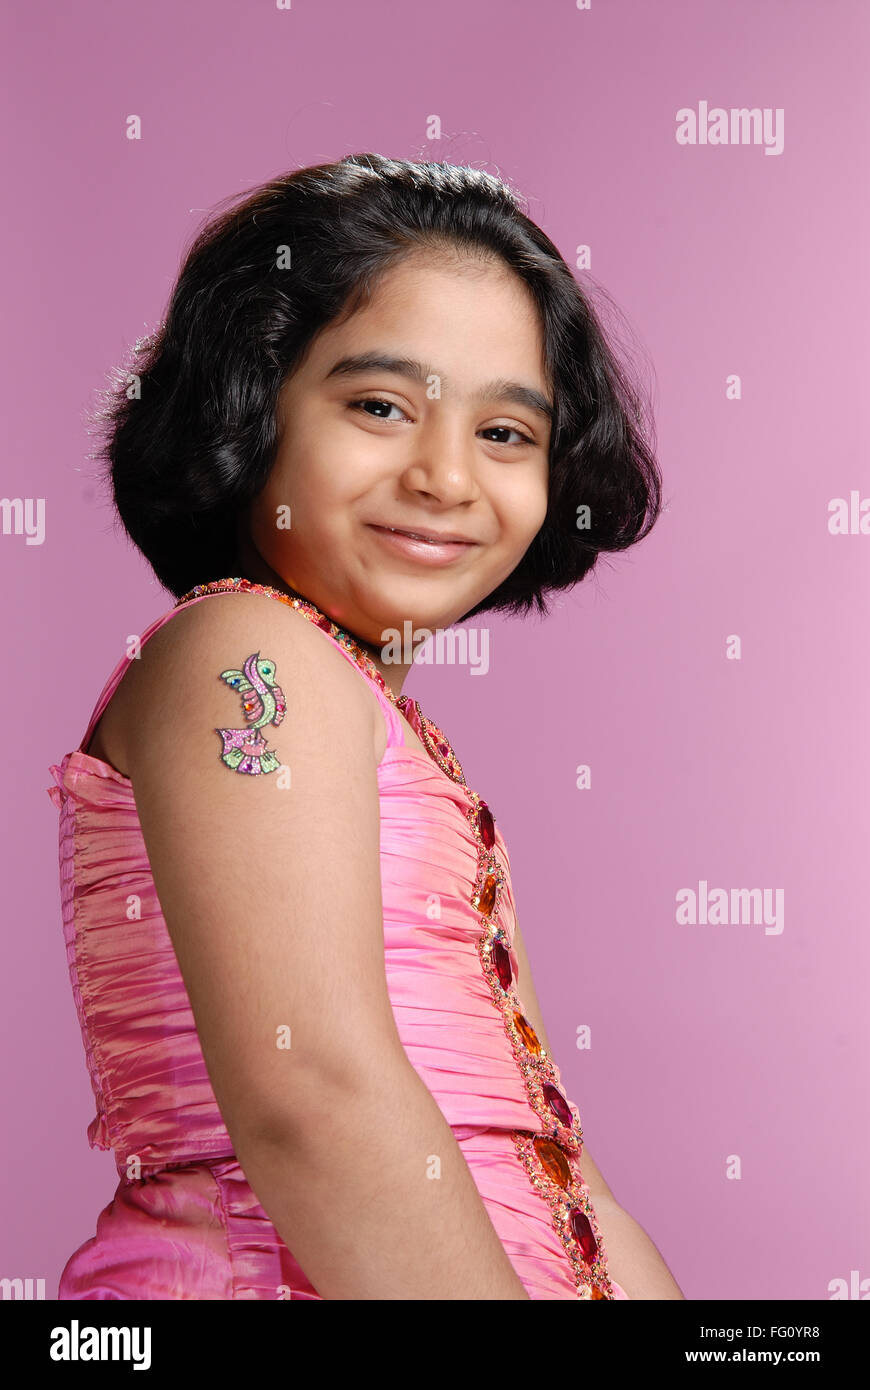 South Asian Indian girl smiling MR# 719B Stock Photo